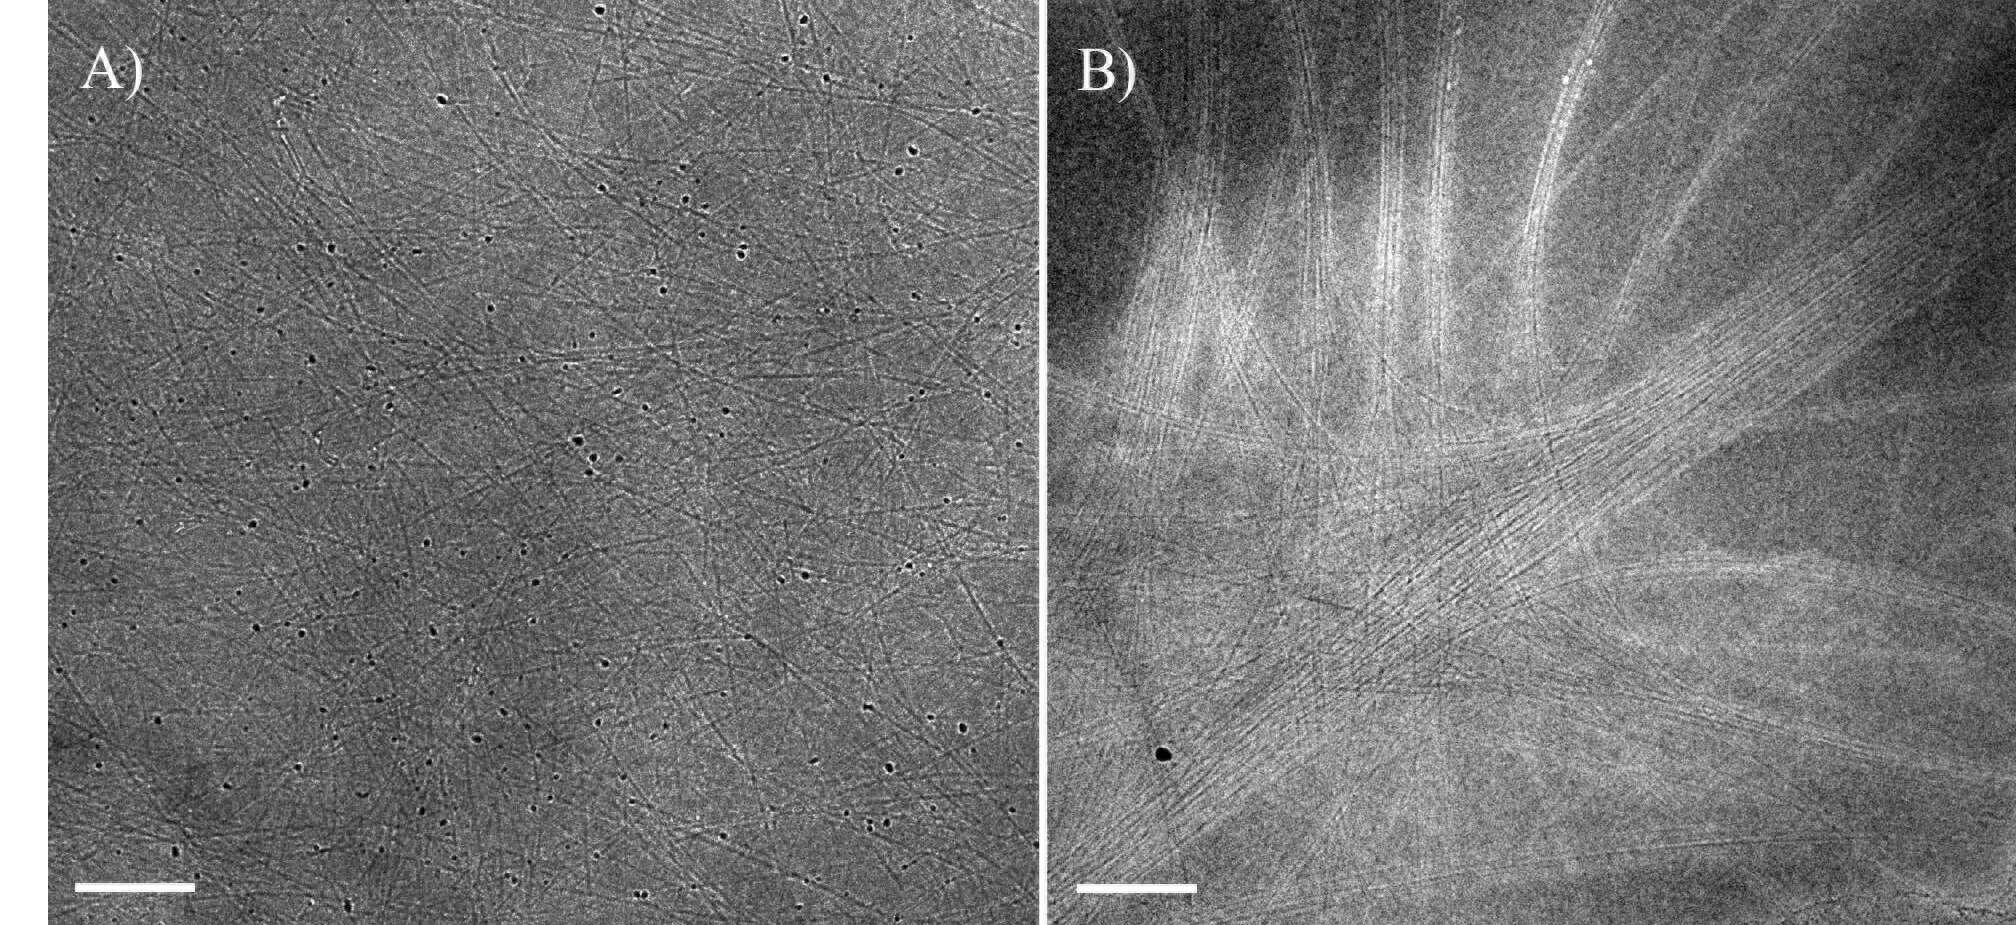 Figure 1: Cryo-TEM images of (A) short HiPco SWNTs at 250 ppm in isotropic solution (phase separation occurs at 1400 ppm). (B) long Meijo SWNTs at 100 ppm in bi-phasic solution (phase separation occurs at 100 ppm). Bars correspond to 100 nm.